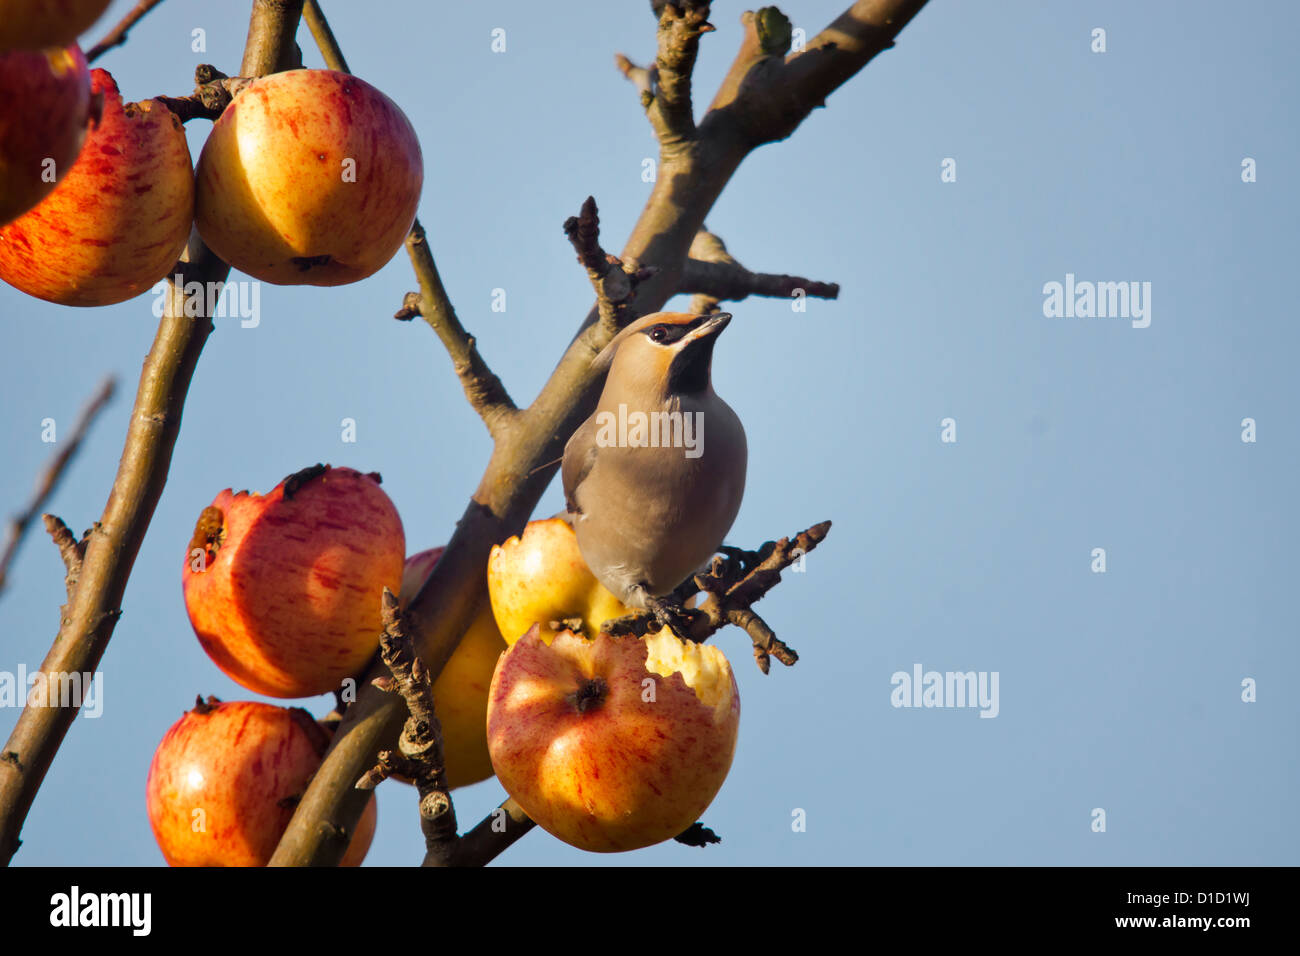 Uccello waxwing mangiare le mele rosse Foto Stock